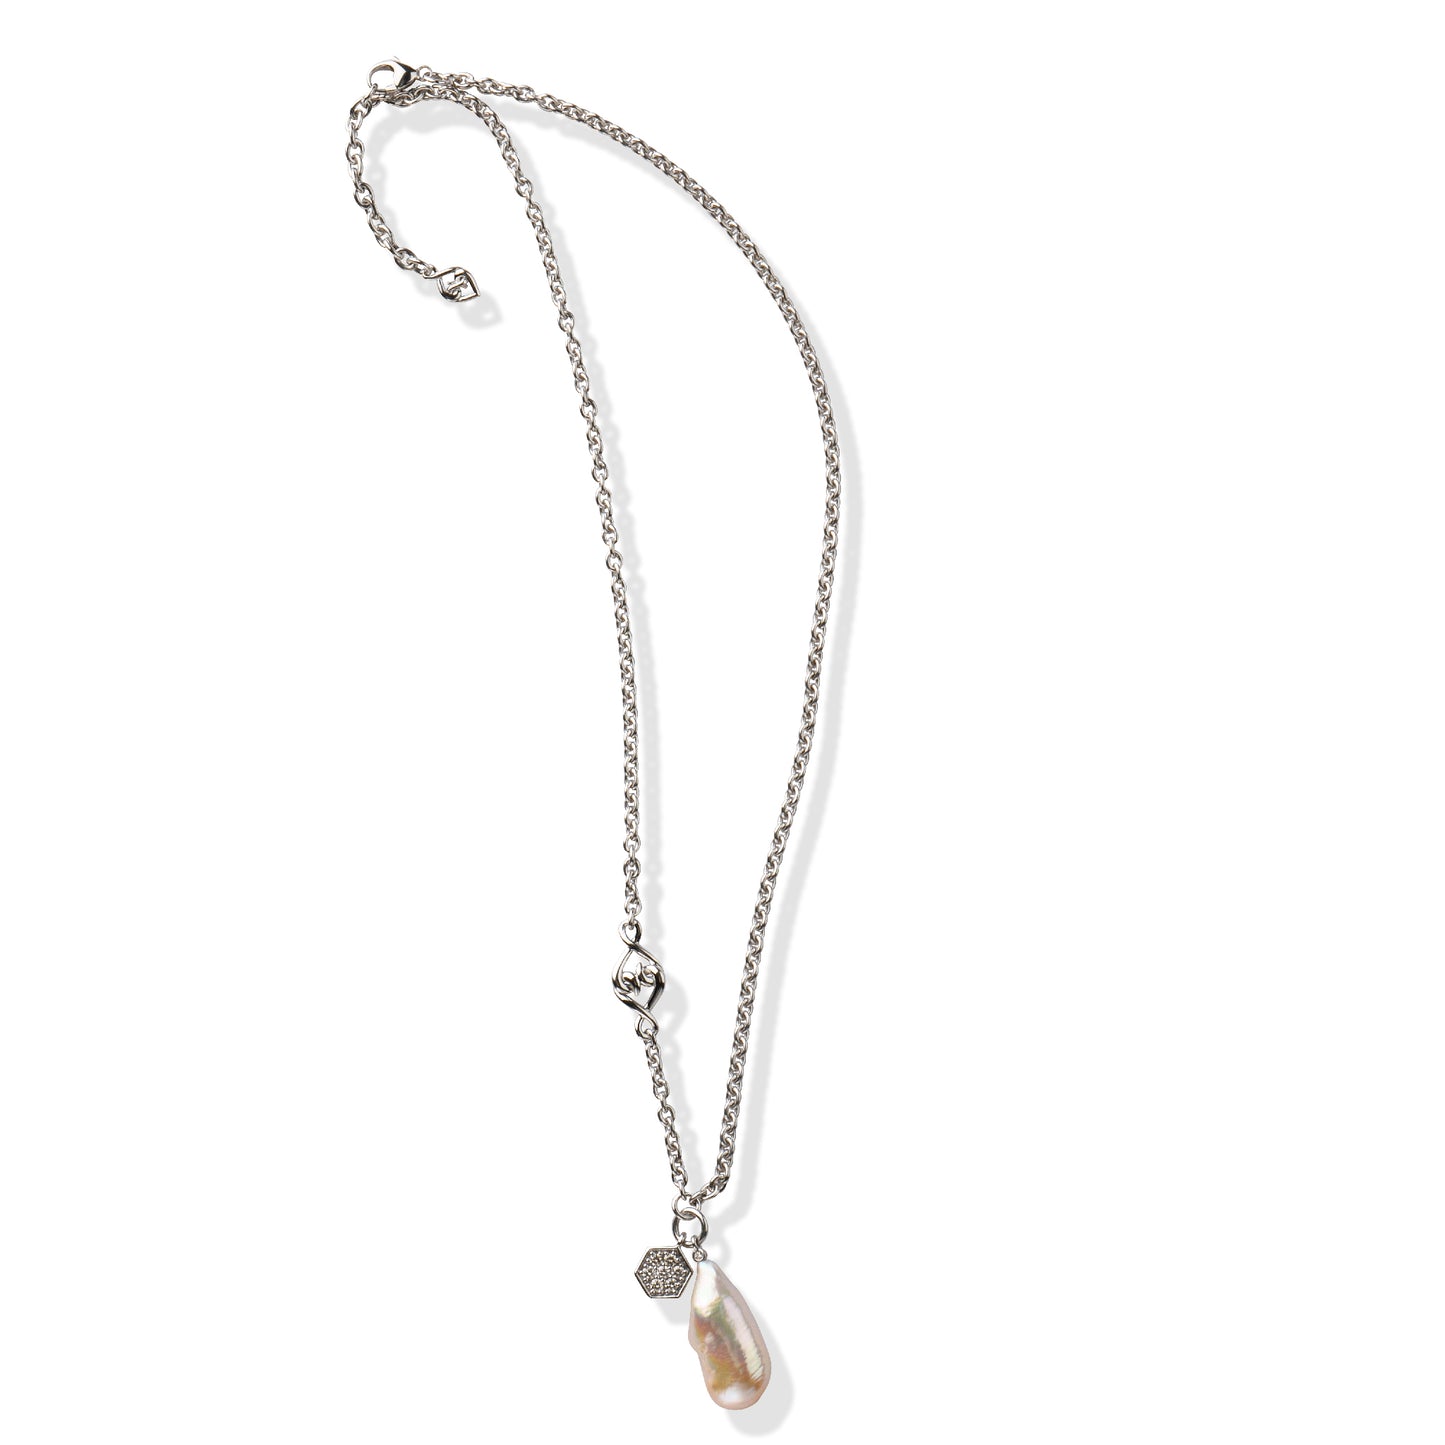 Silver Pearl Necklace | 19.5" Pearl Diamond Necklace with Sterling Silver Chain